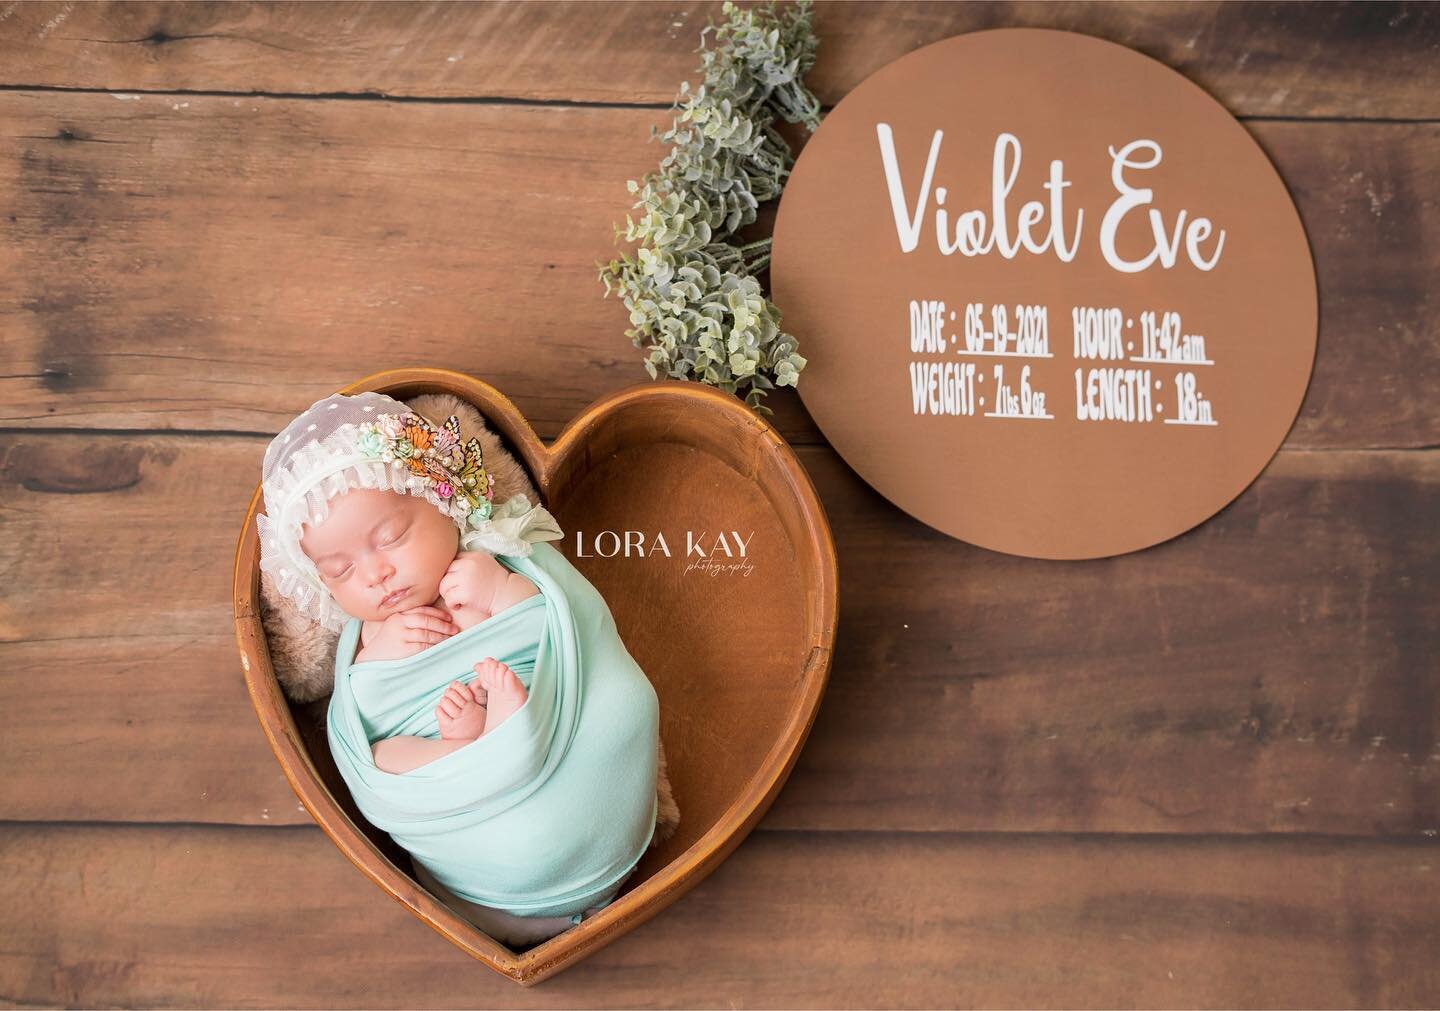 Violet 💜
Such a beautiful baby 🥰 
Sign by @jn_craftcreation 
#newbornphotography #lorakayphotography #lorakaynewborn #lorakayphotos #babyfever #summercolors #butterflies #newbornphotography #explorepage #explore #sweetdreams #njphotographer #flphot